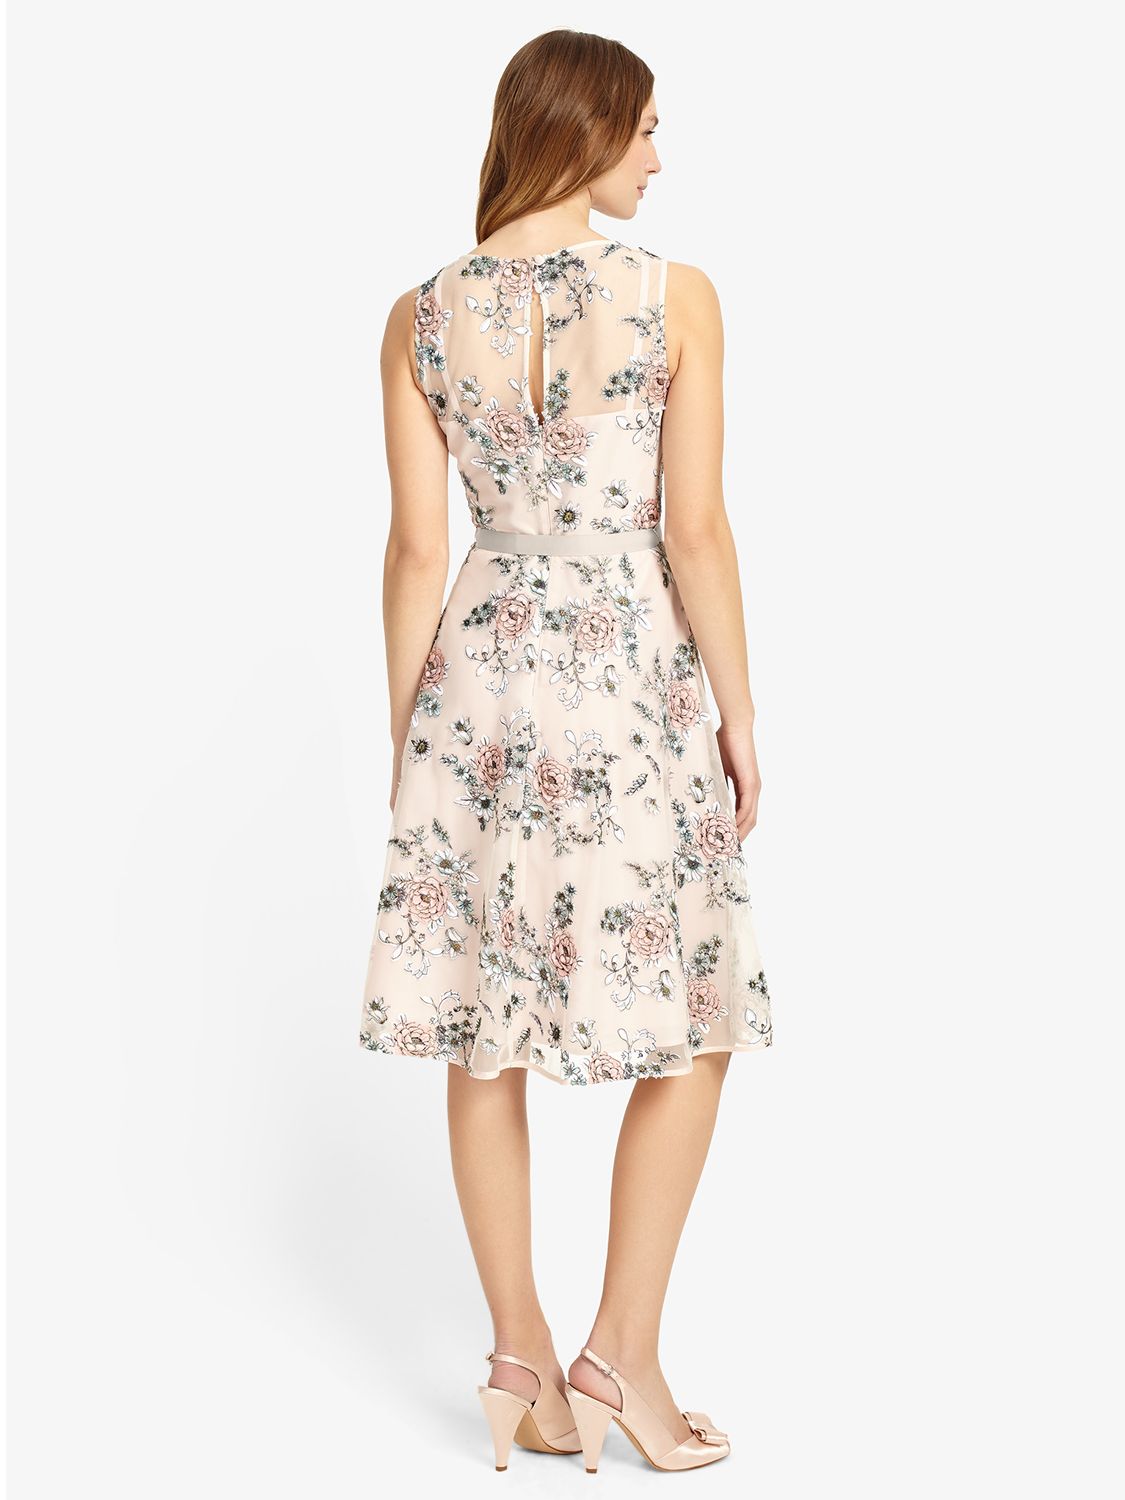 Phase Eight Prudence Embroidered Dress, Cameo